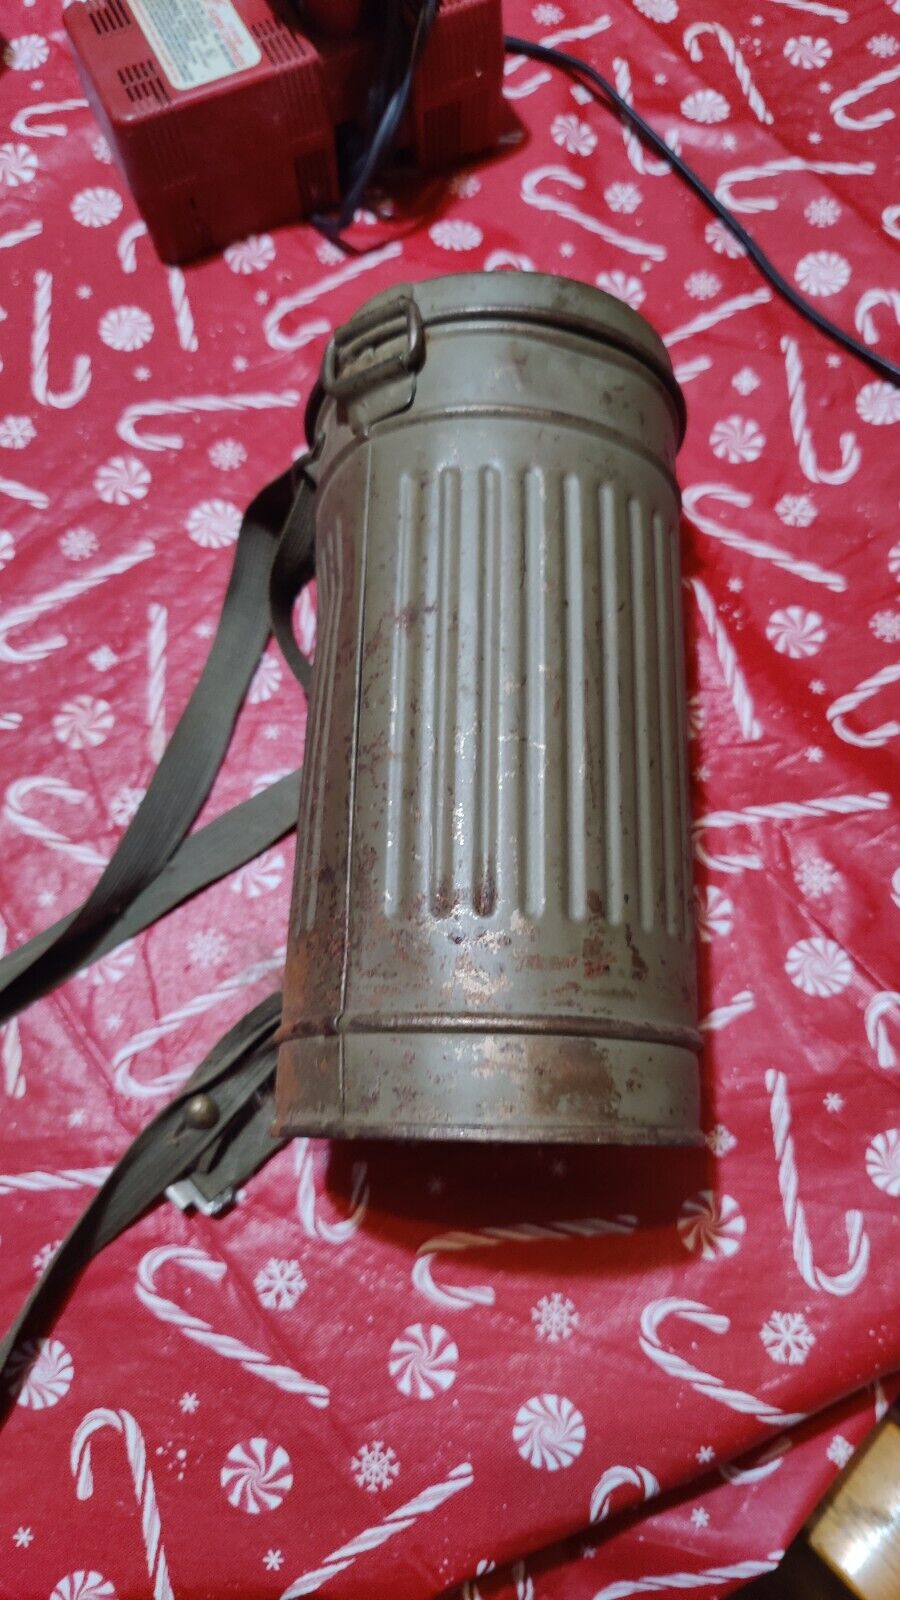 WW2 Era German Gas Mask With Filter and Canister